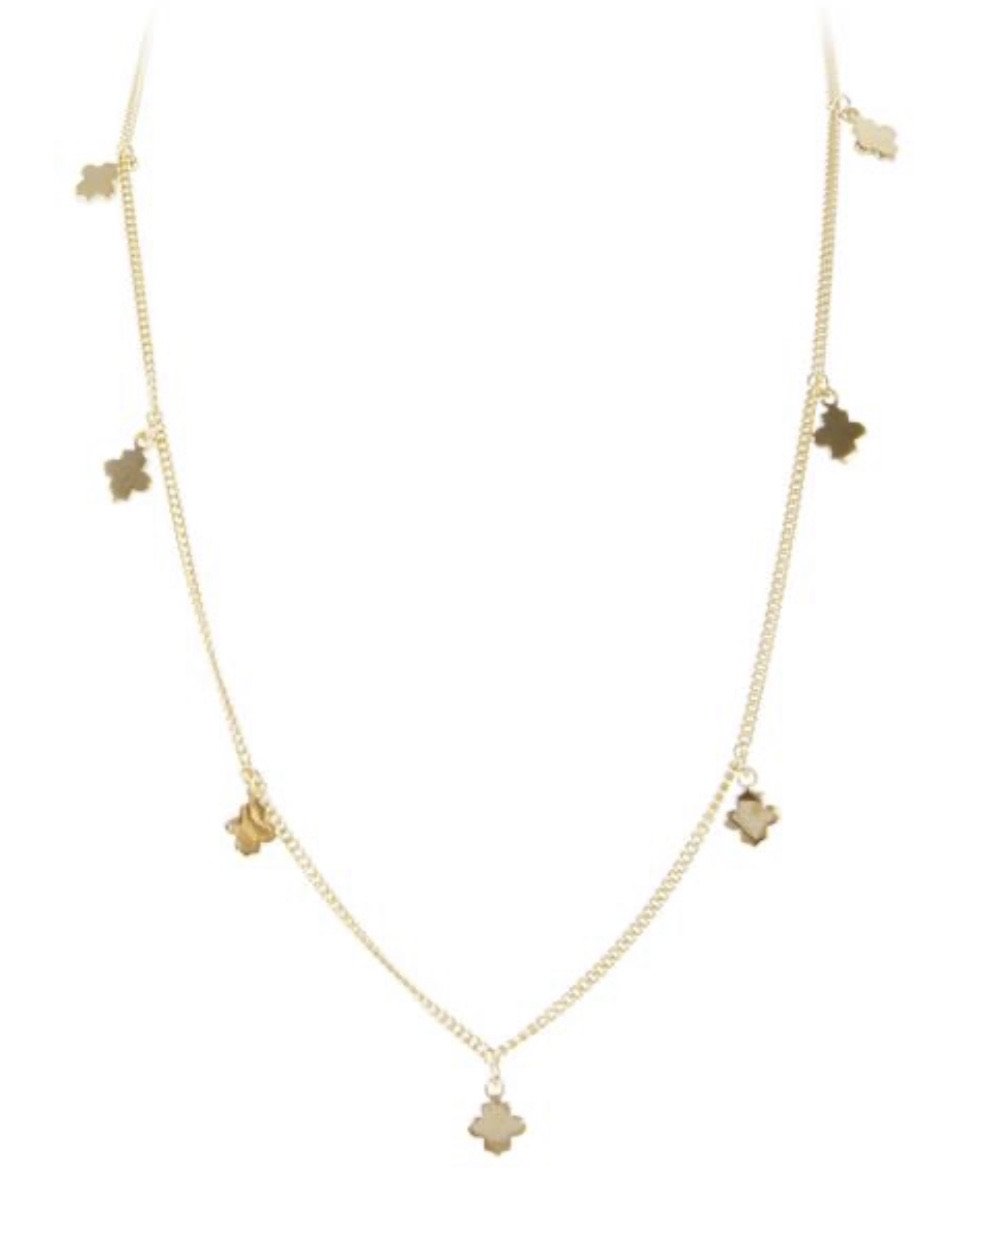 Gold Clover Charm Necklace by Fairley